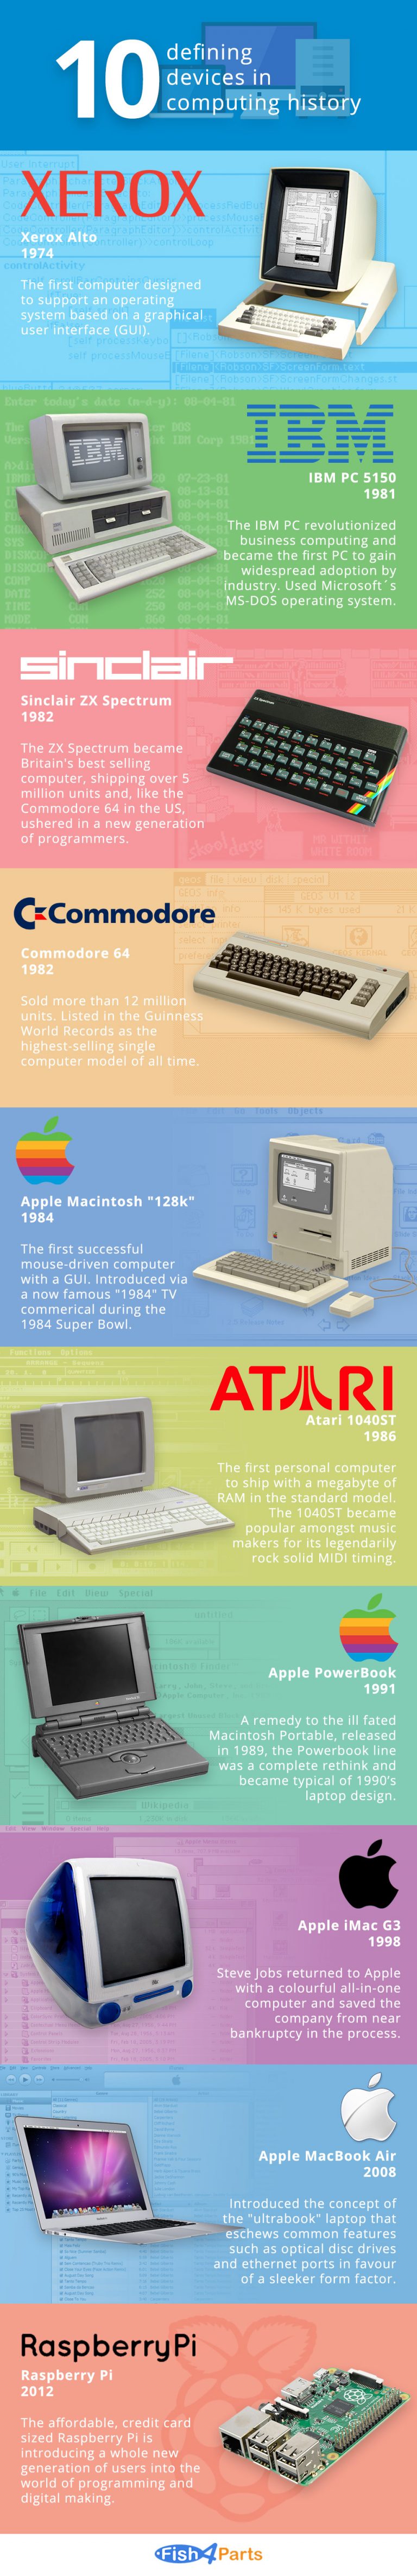 10-defining-devices-in-computing-history-768×4748